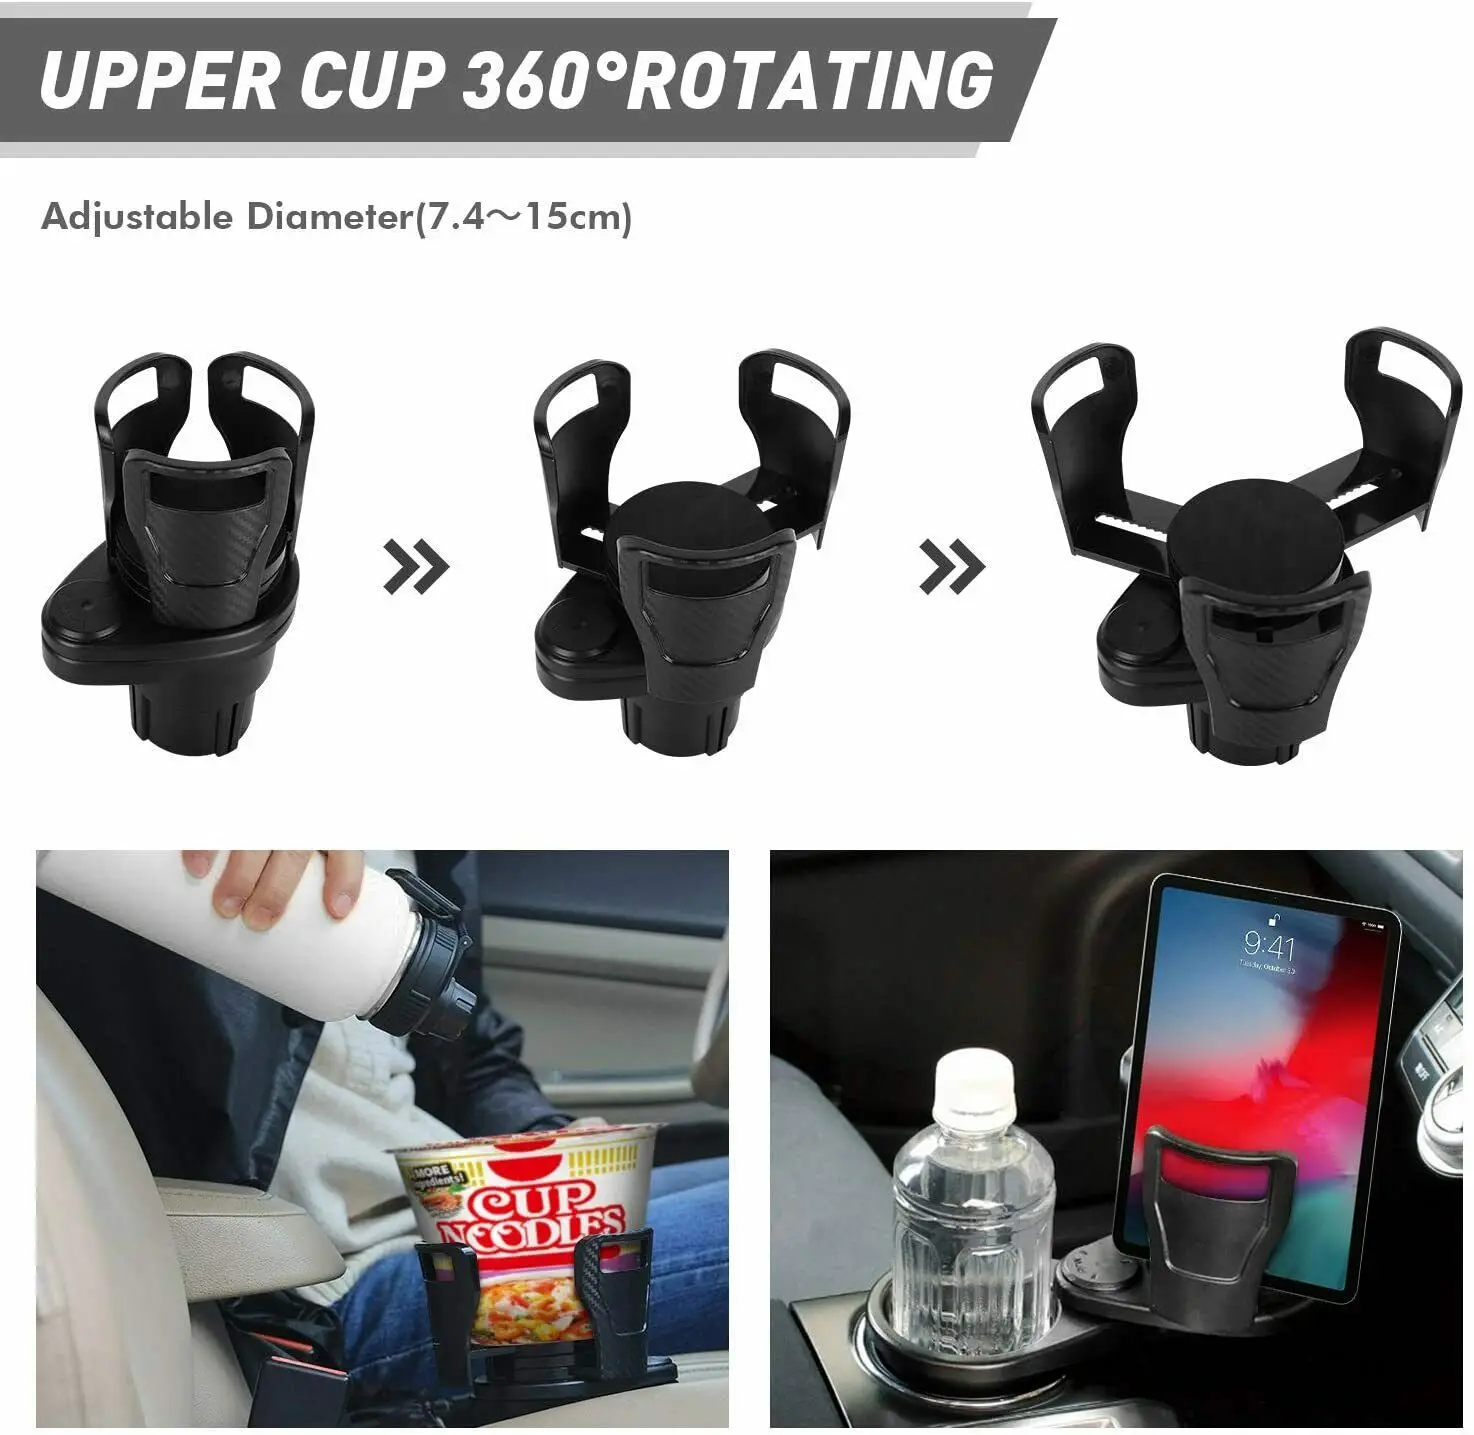 2 in 1 Multifunctional Car Cup Holder 360° Rotating Adjustable Car Cup  Holder Expander Adapter Base Tray for Snack Bottles Cups